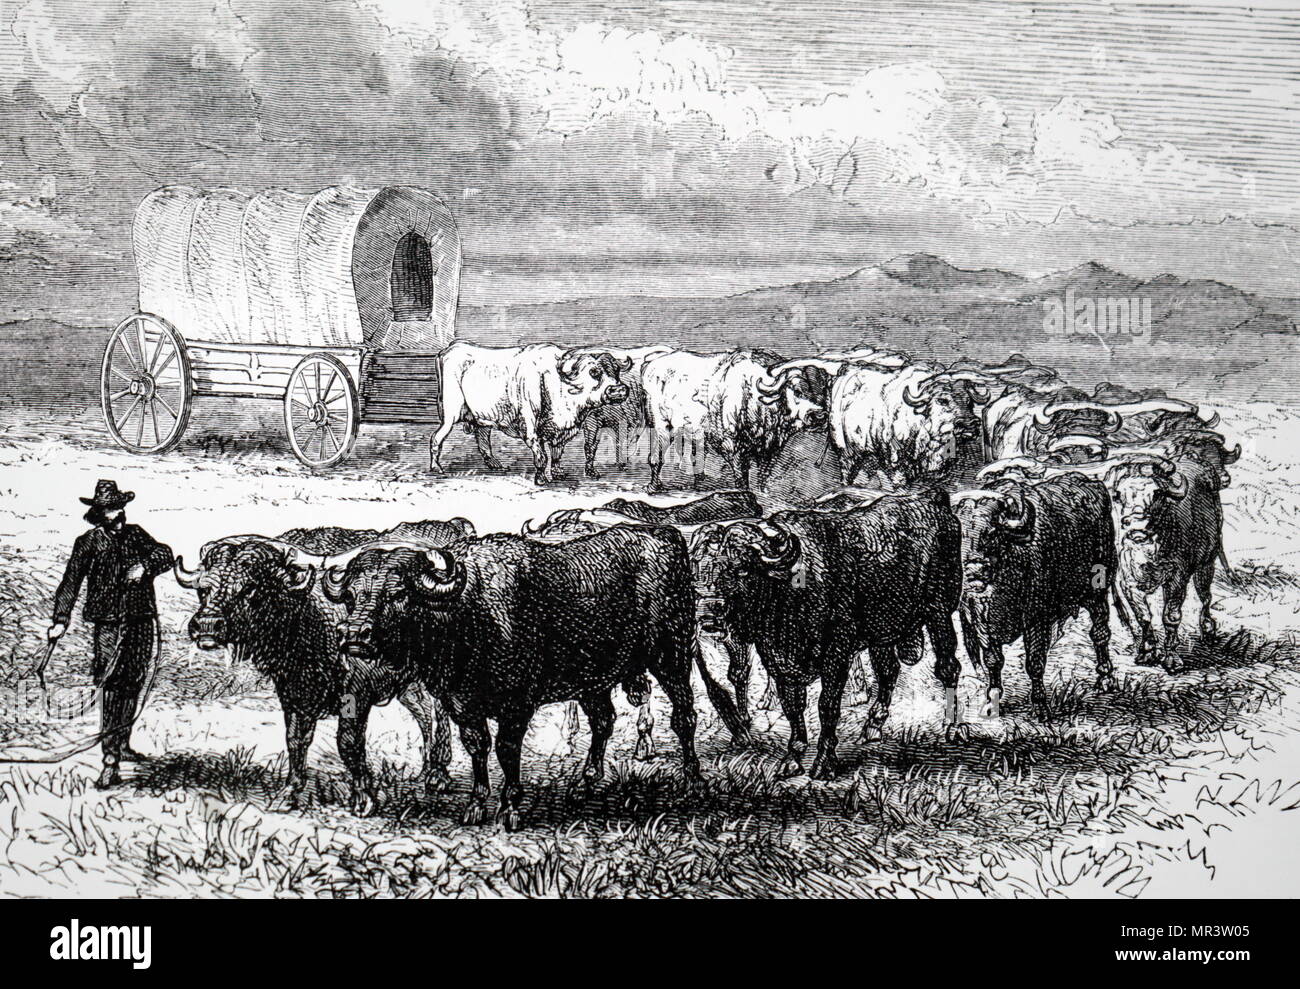 Illustration depicting a bullock-drawn covered wagon, similar to the type used by emigrants to America. Dated 19th century Stock Photo